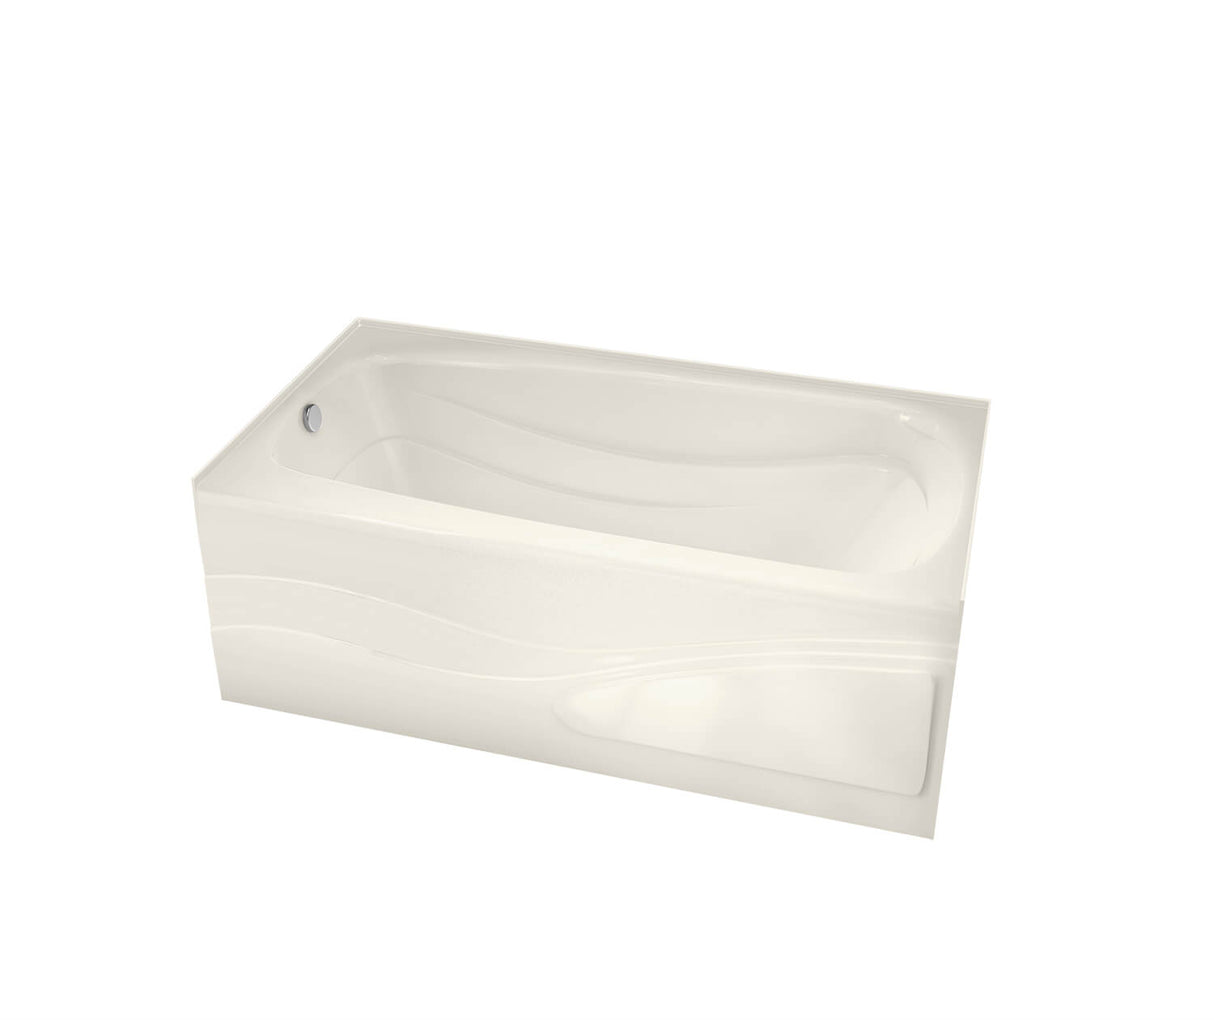 MAAX 102201-003-007-002 Tenderness 6032 Acrylic Alcove Right-Hand Drain Whirlpool Bathtub in Biscuit